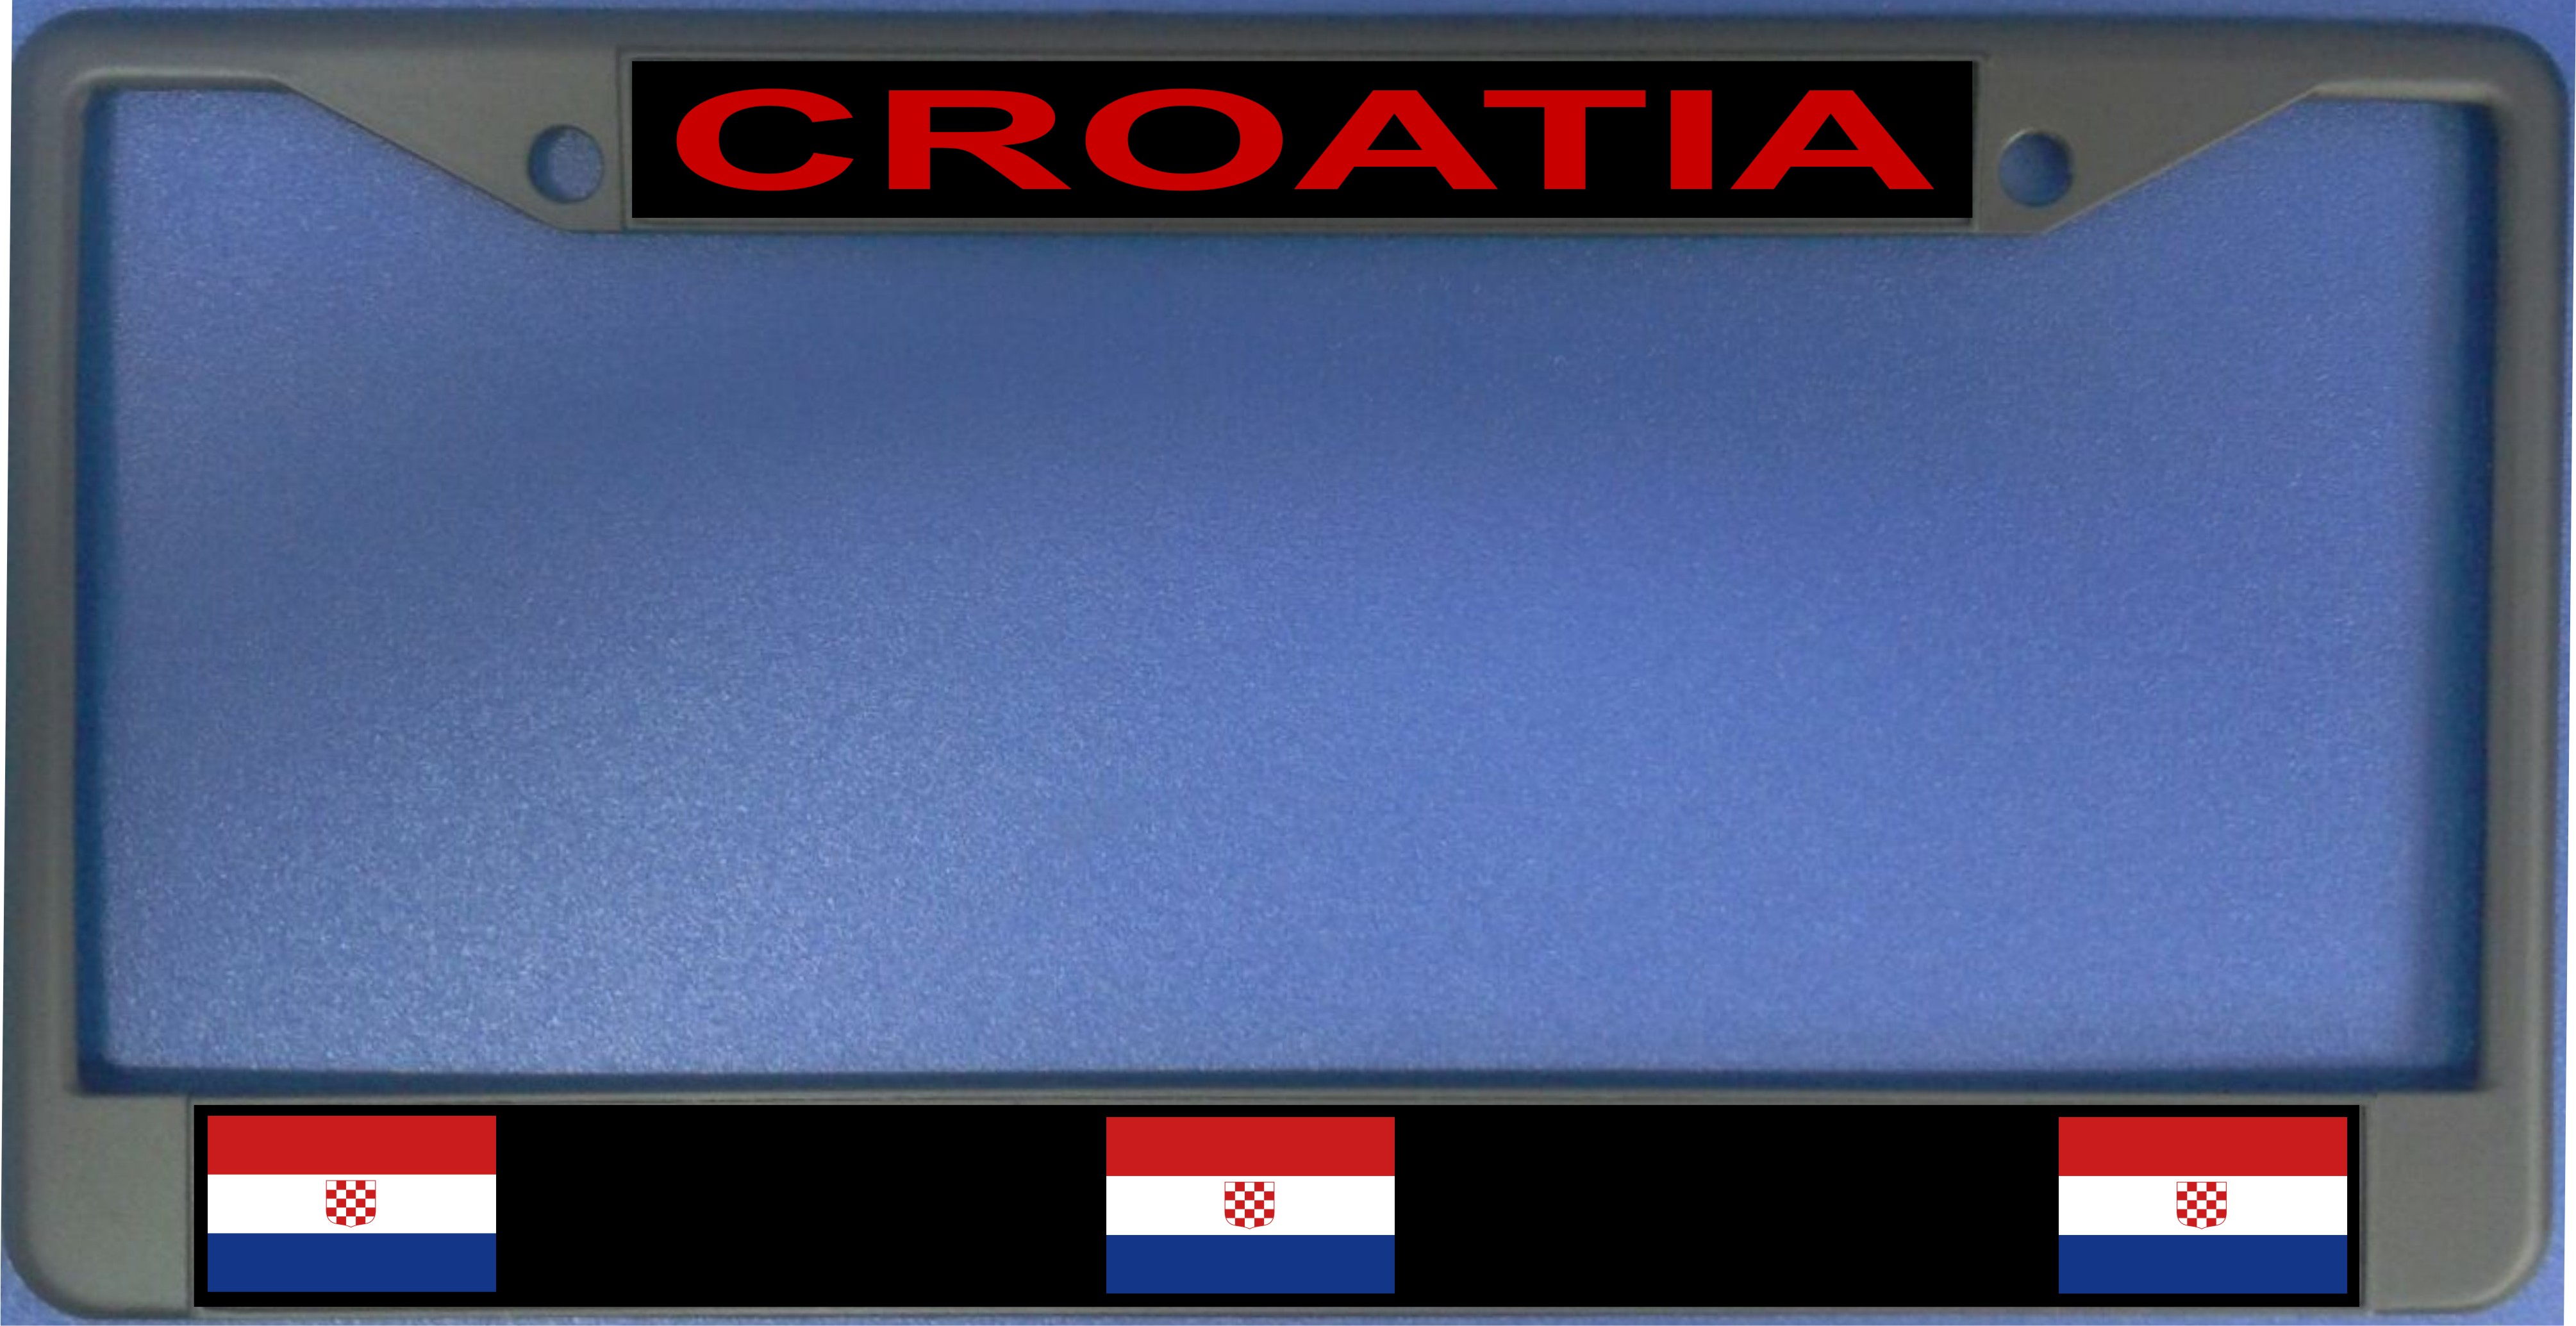 Croatia FLAG Photo License Plate Frame  Free Screw Caps with this Frame